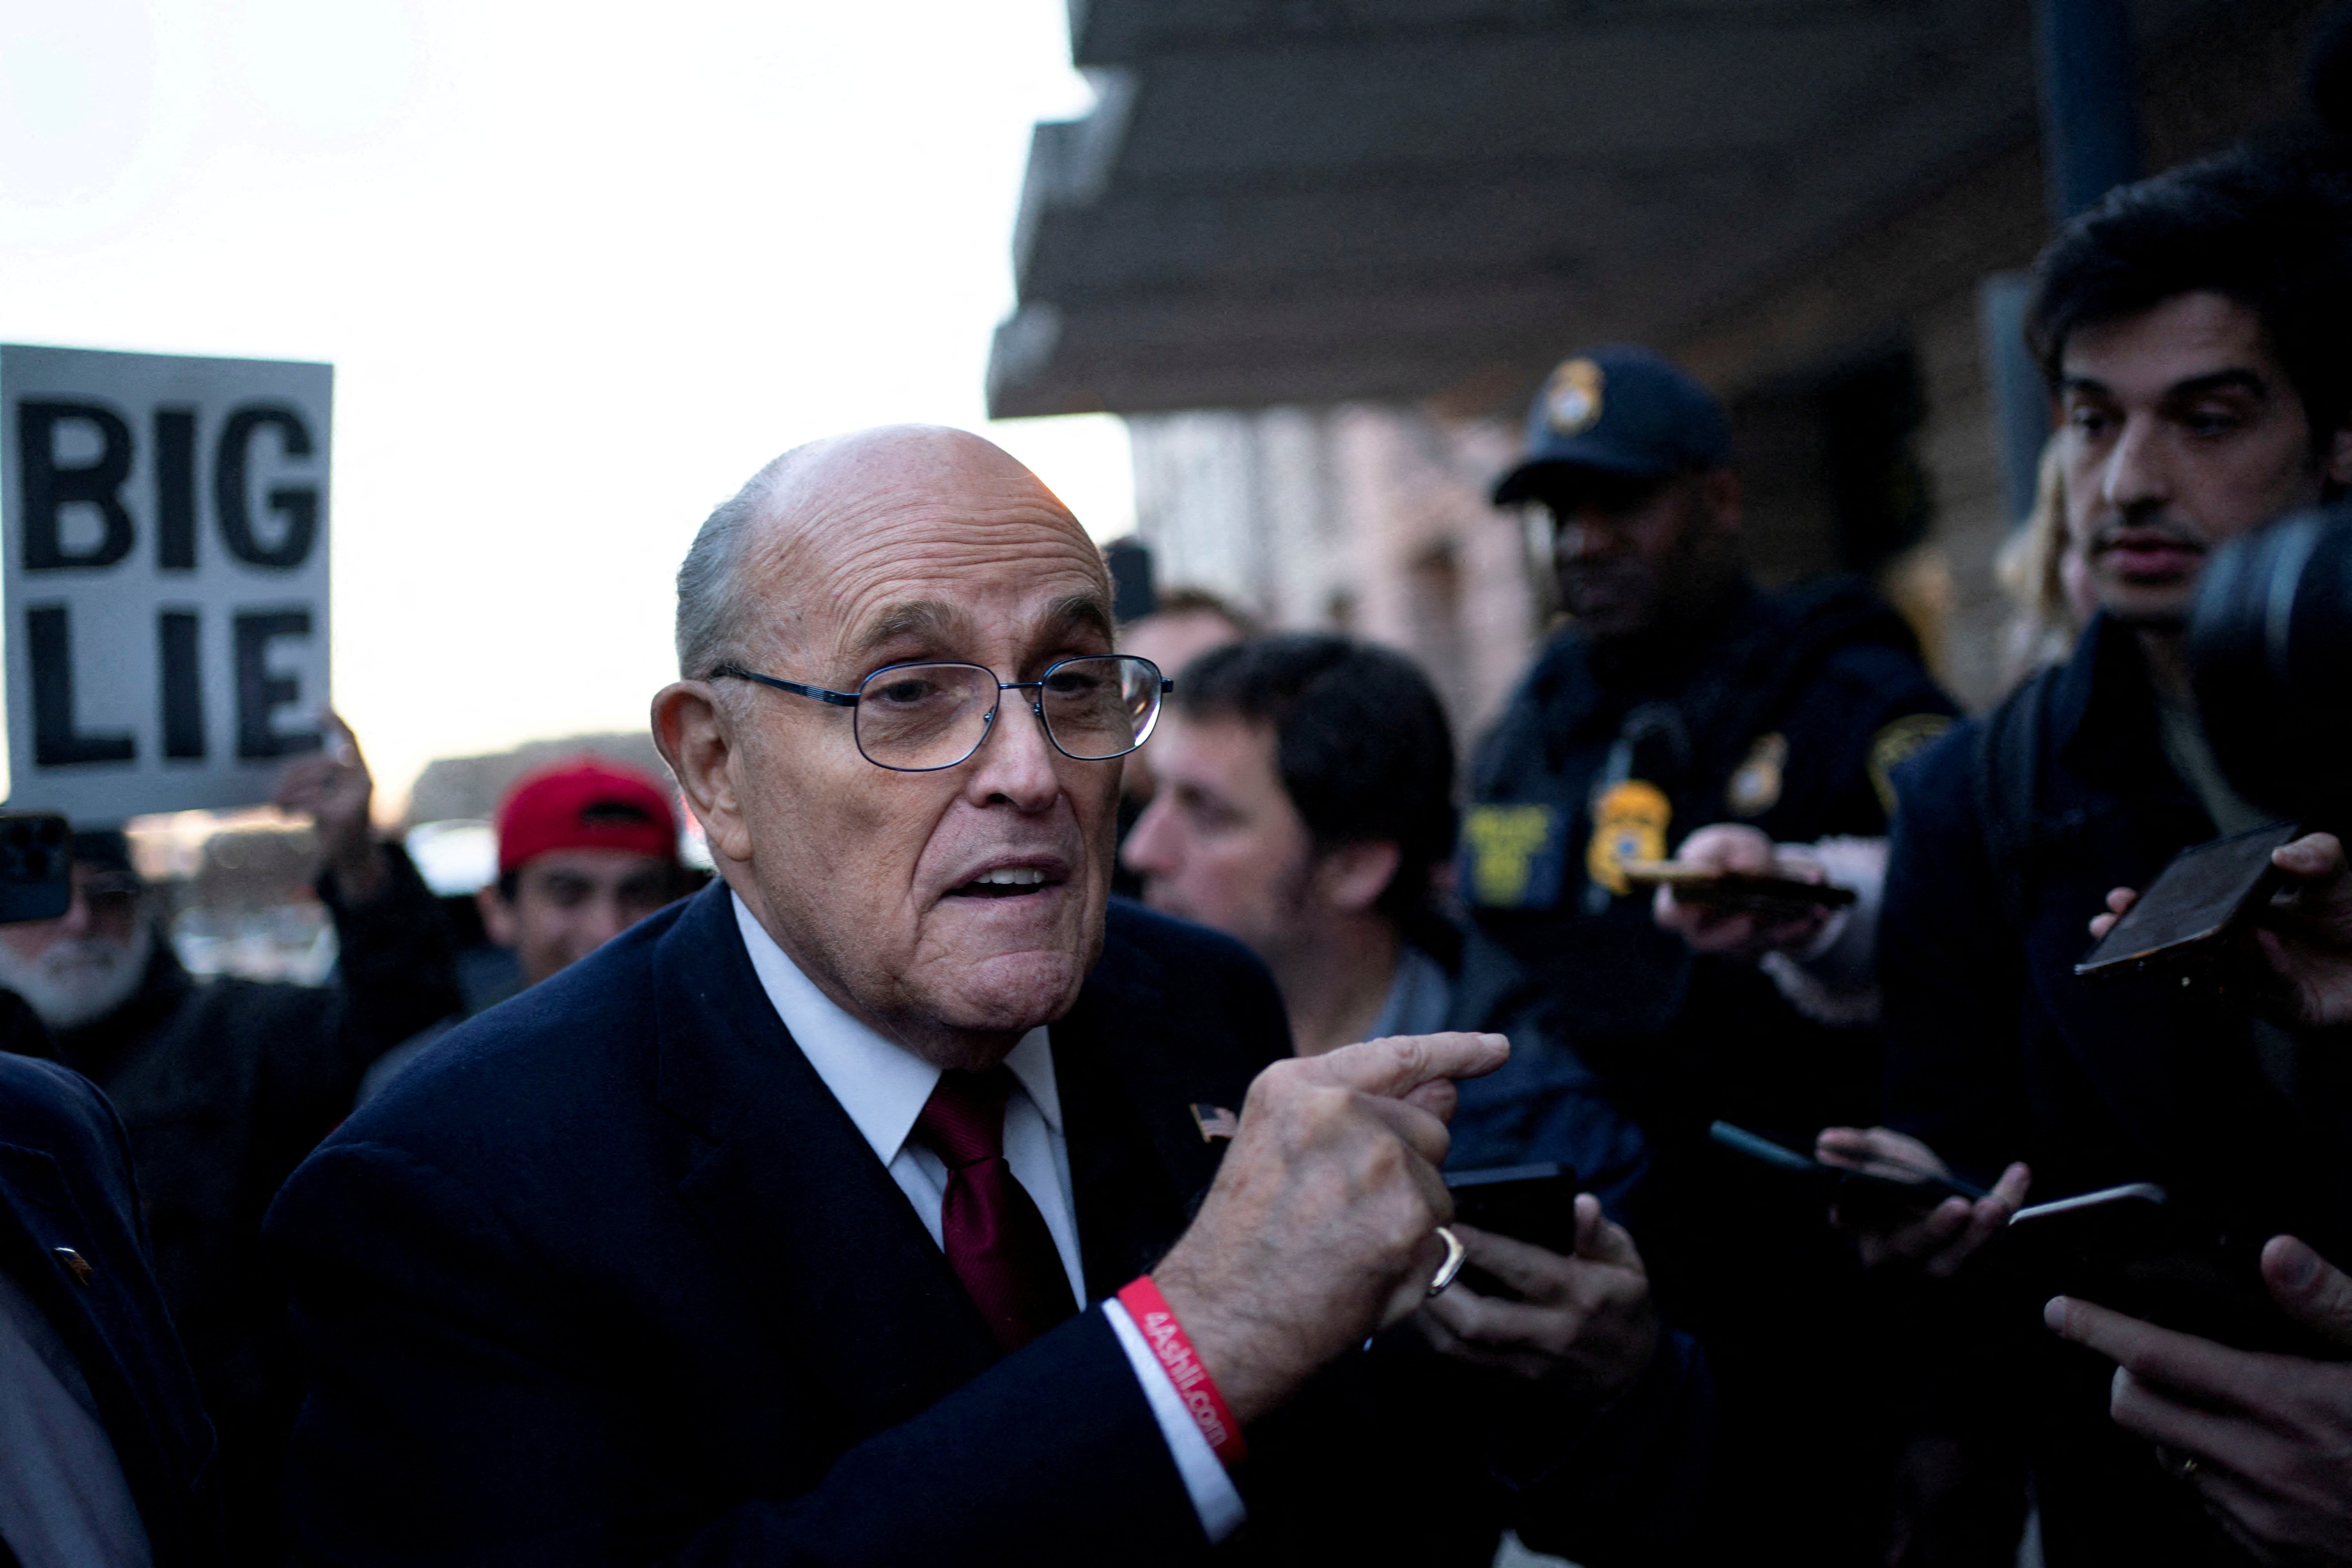 Rudy Giuliani was pictured leaving a courthouse in Washington DC after a jury ordered him to pay $148m for defaming a pair of election workers.